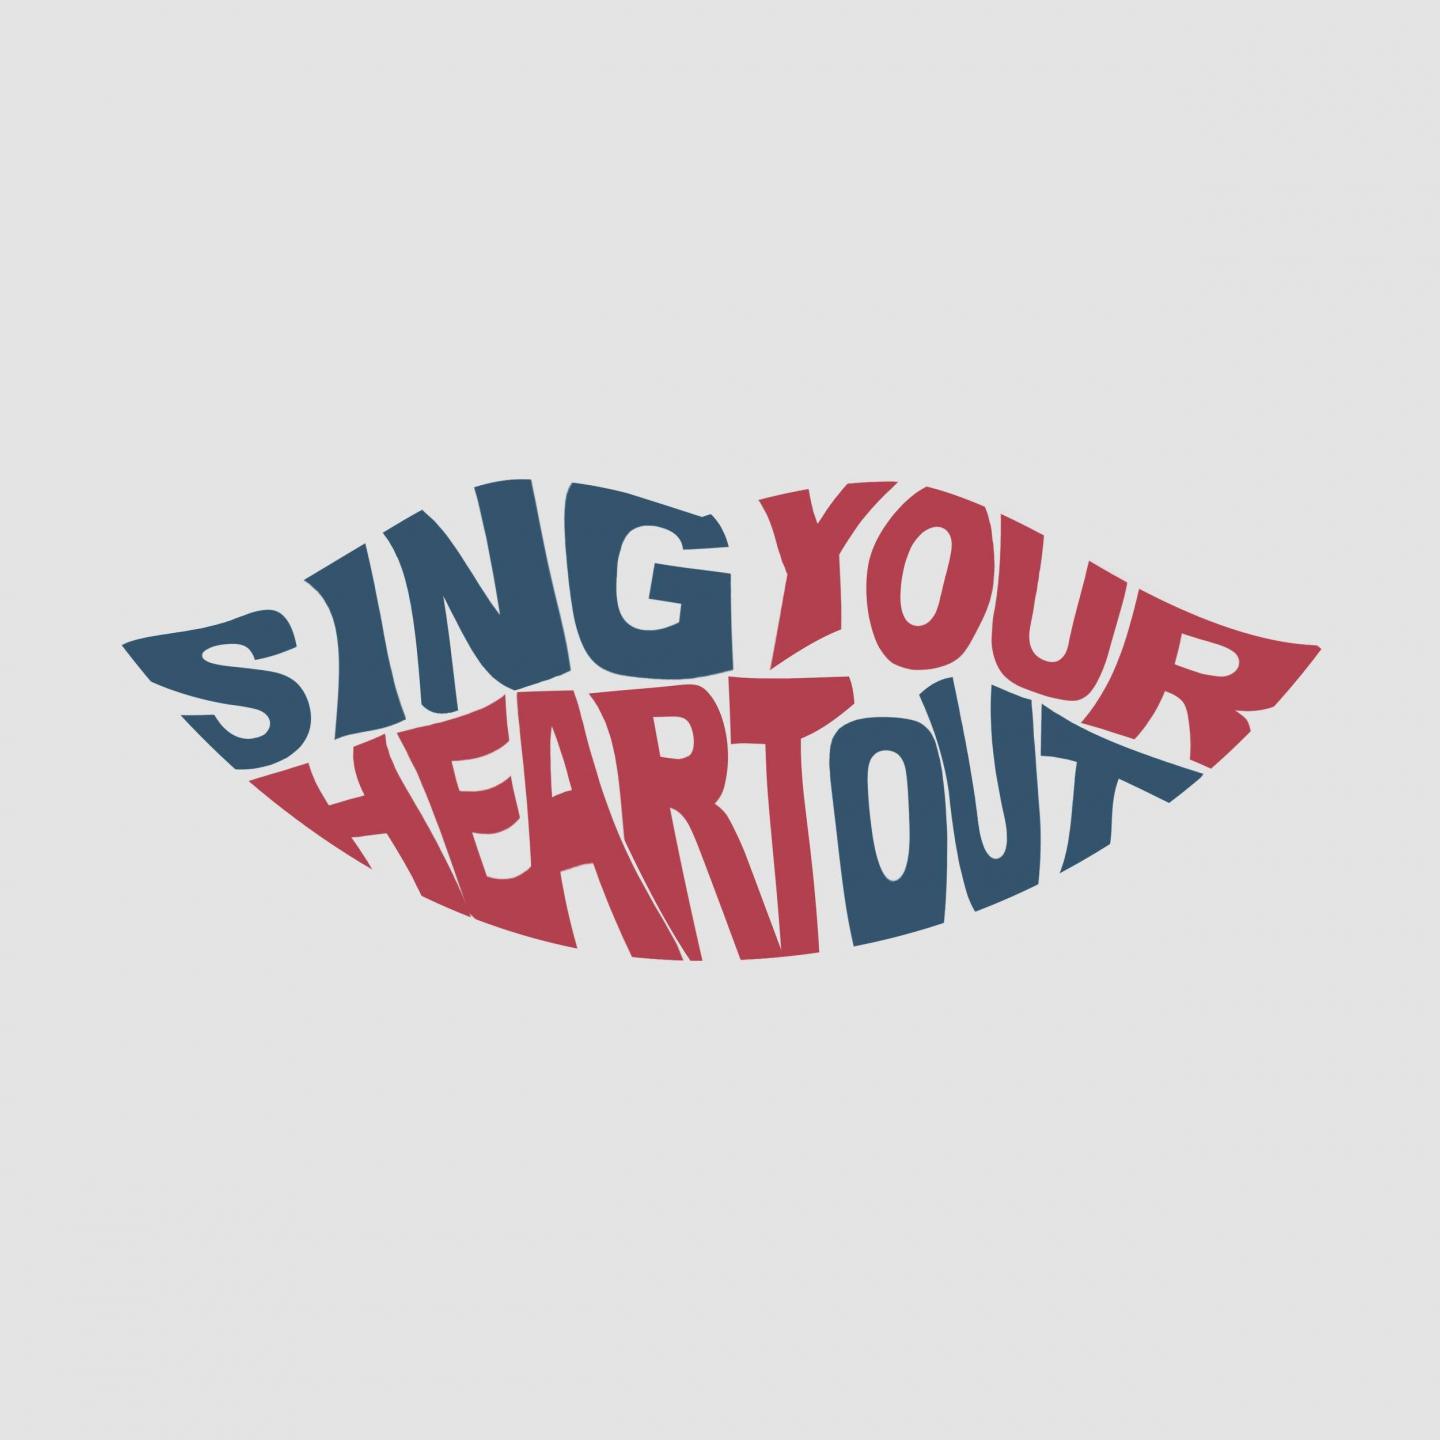 Sing Your Heart Out